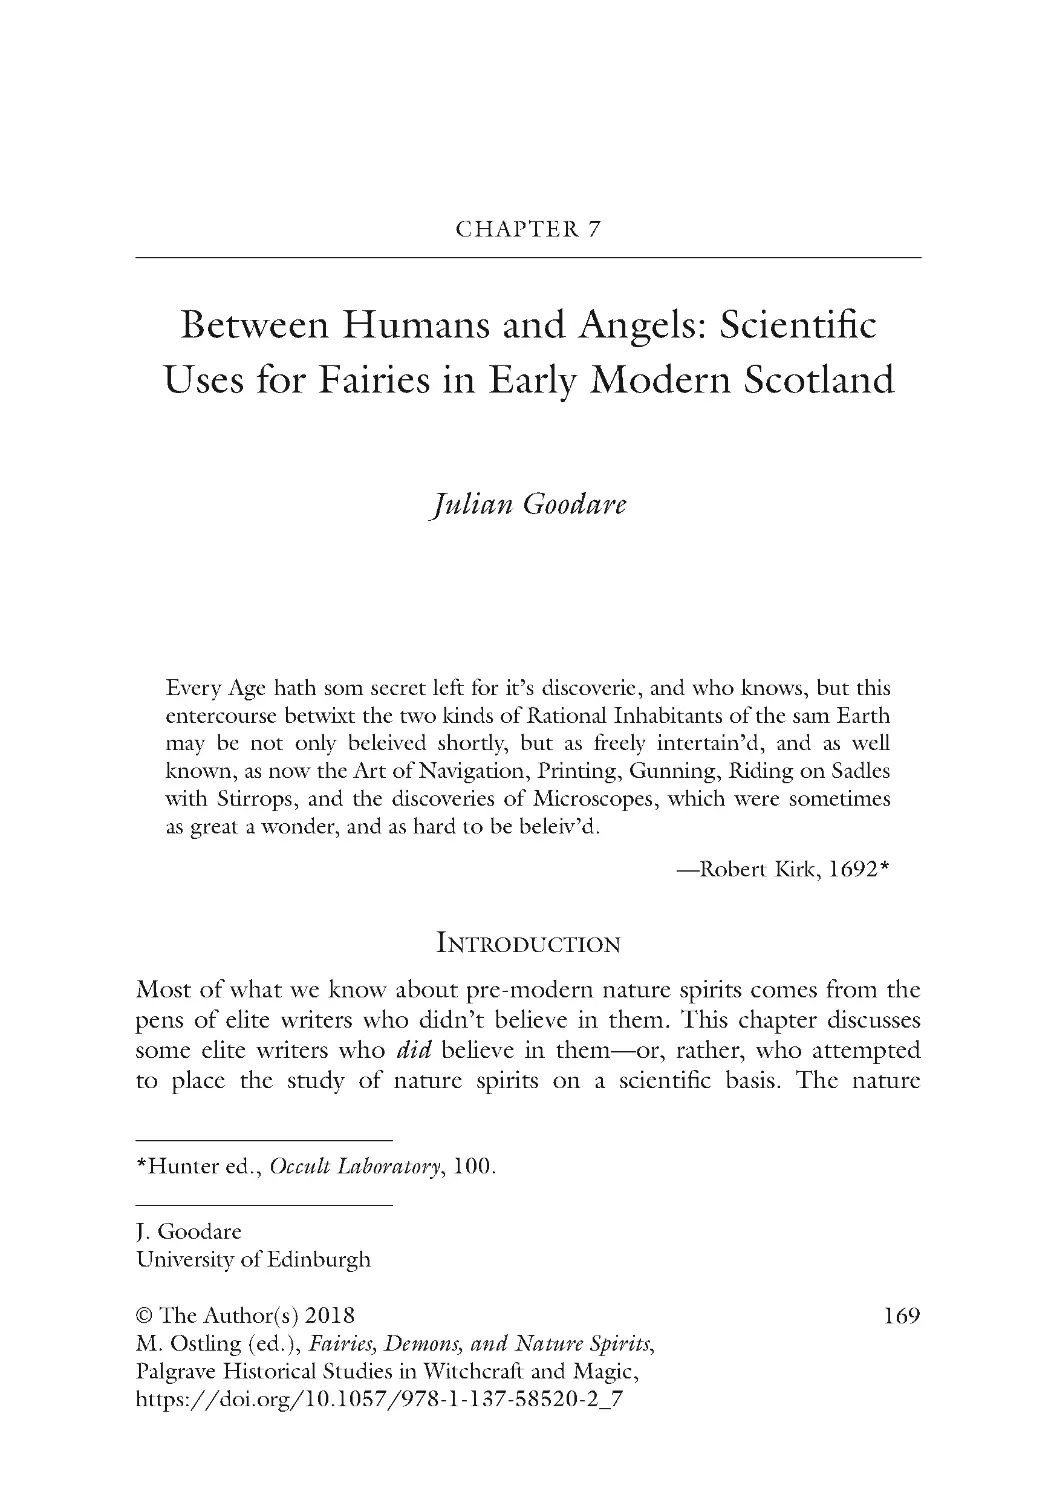 Chapter 7 Between Humans and Angels: Scientific Uses for Fairies in Early Modern Scotland